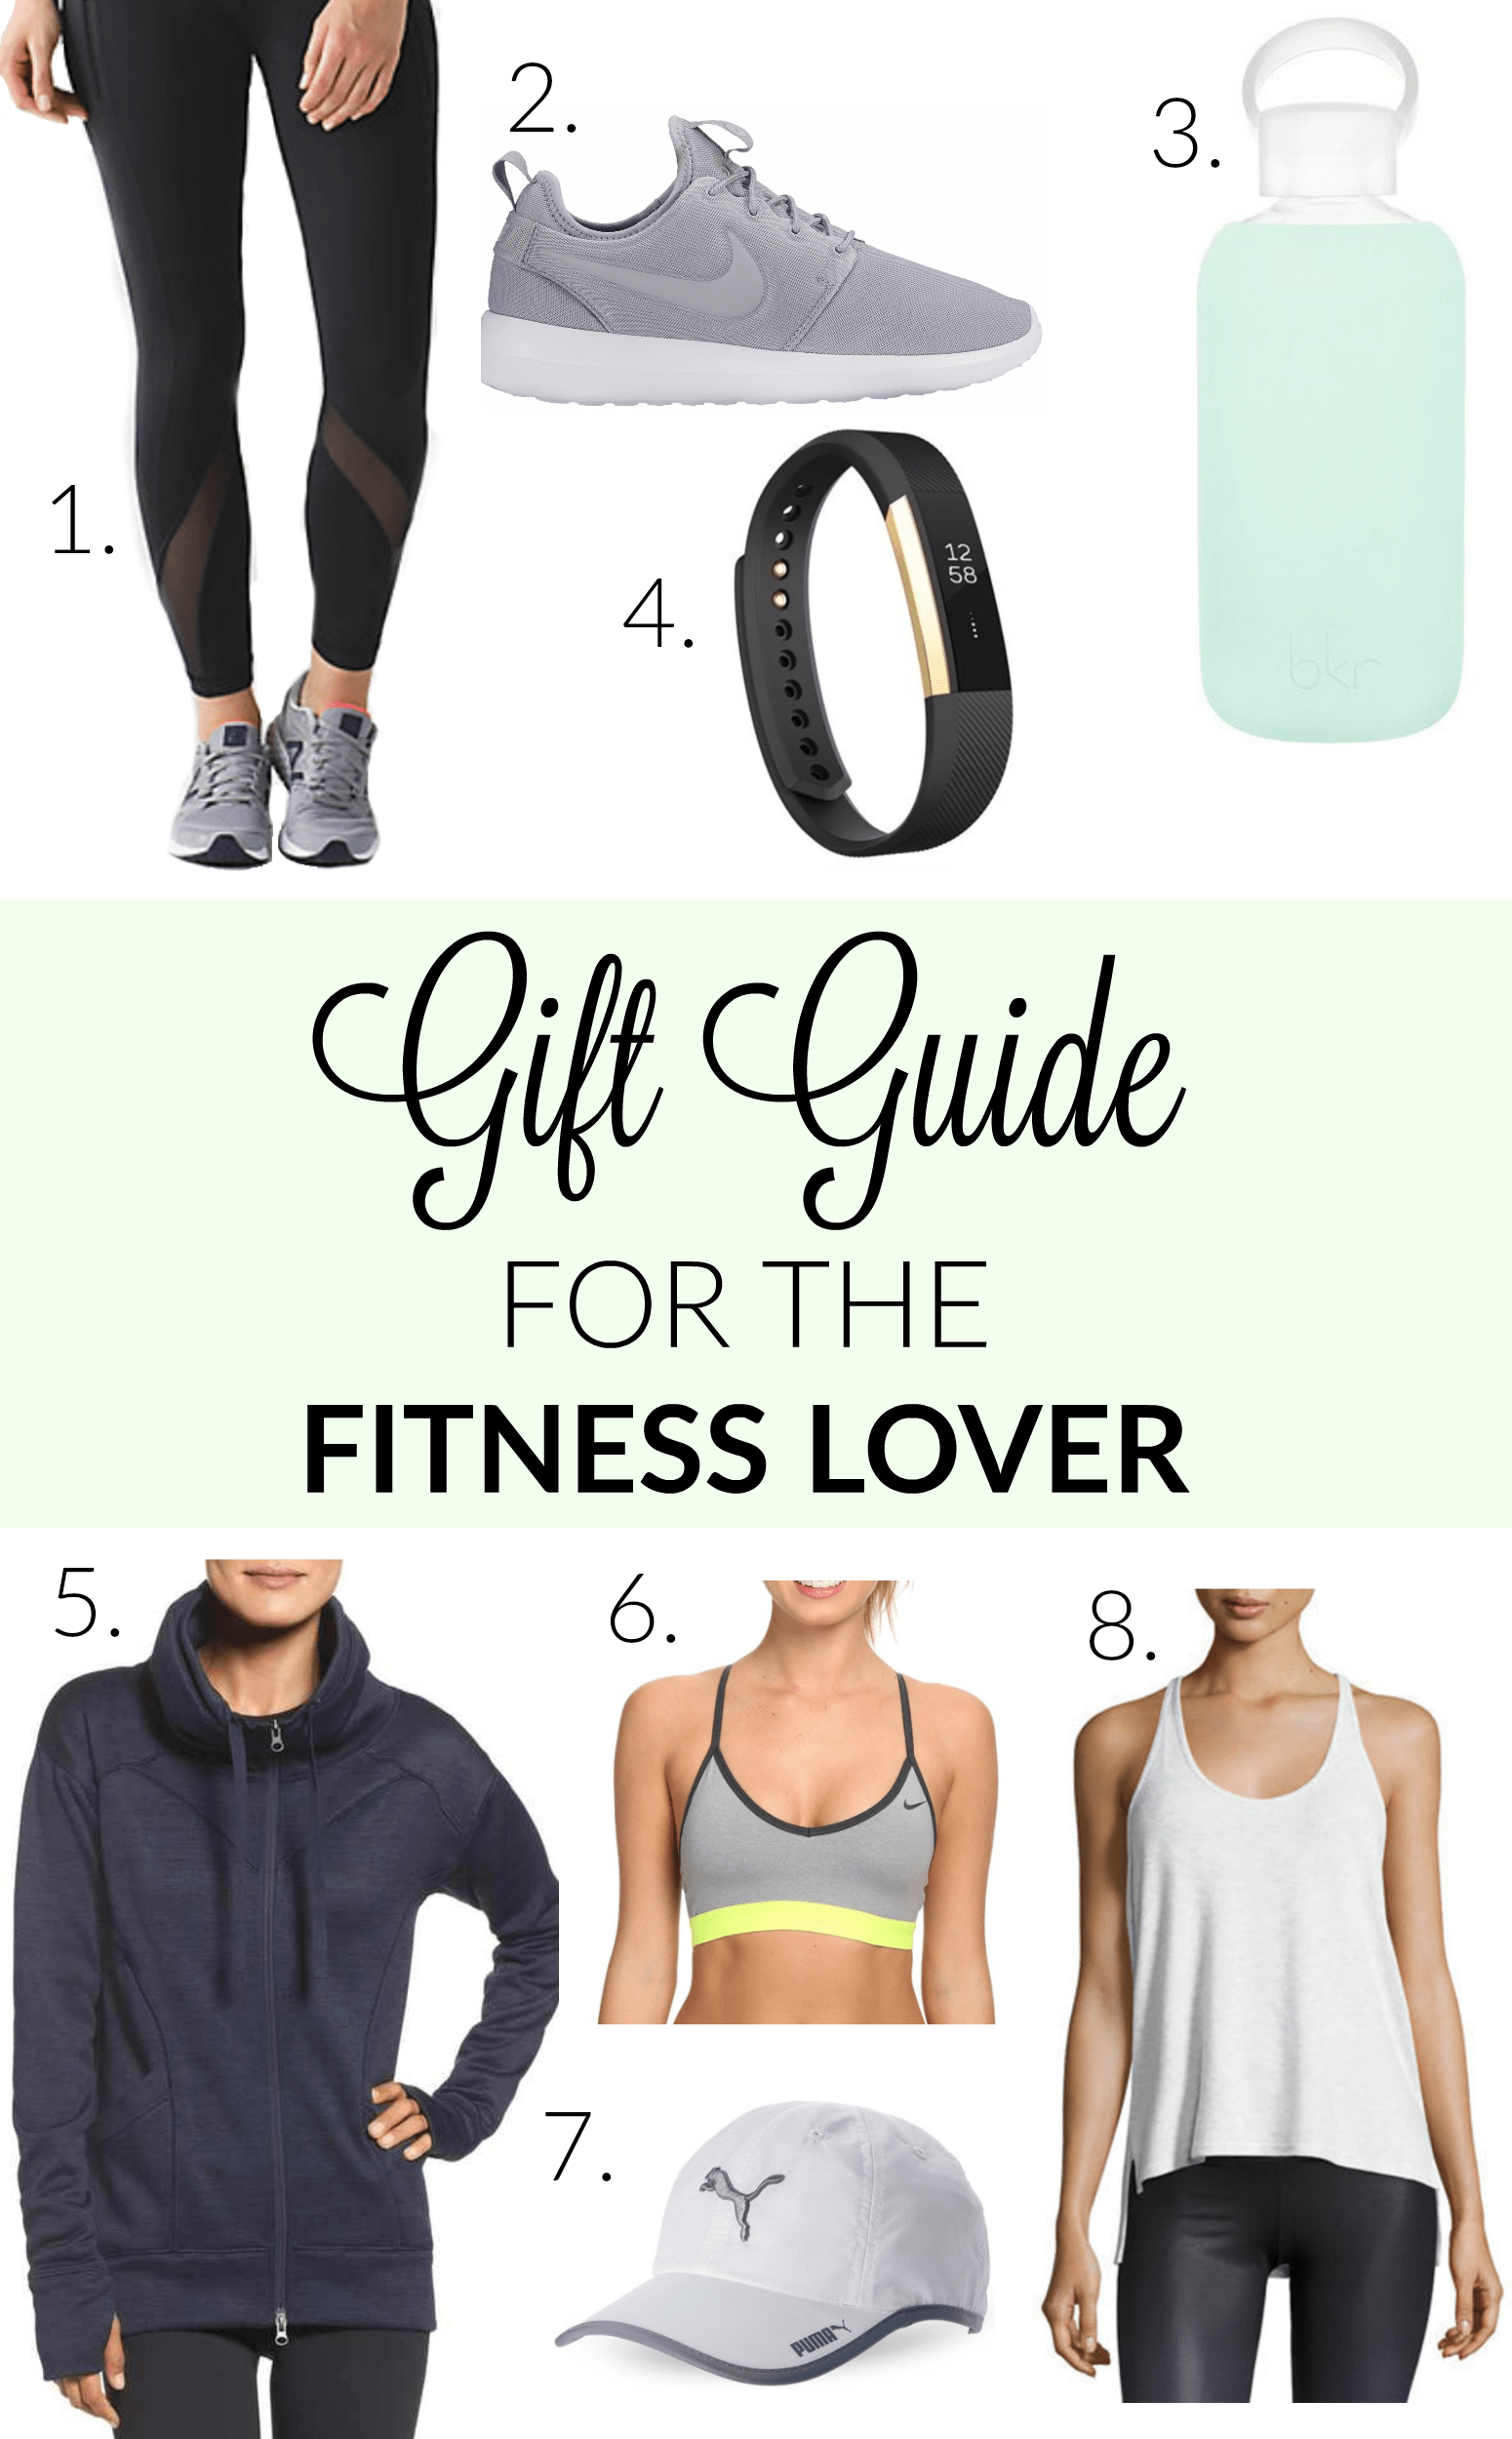 Gift Guide for the Fitness Lover